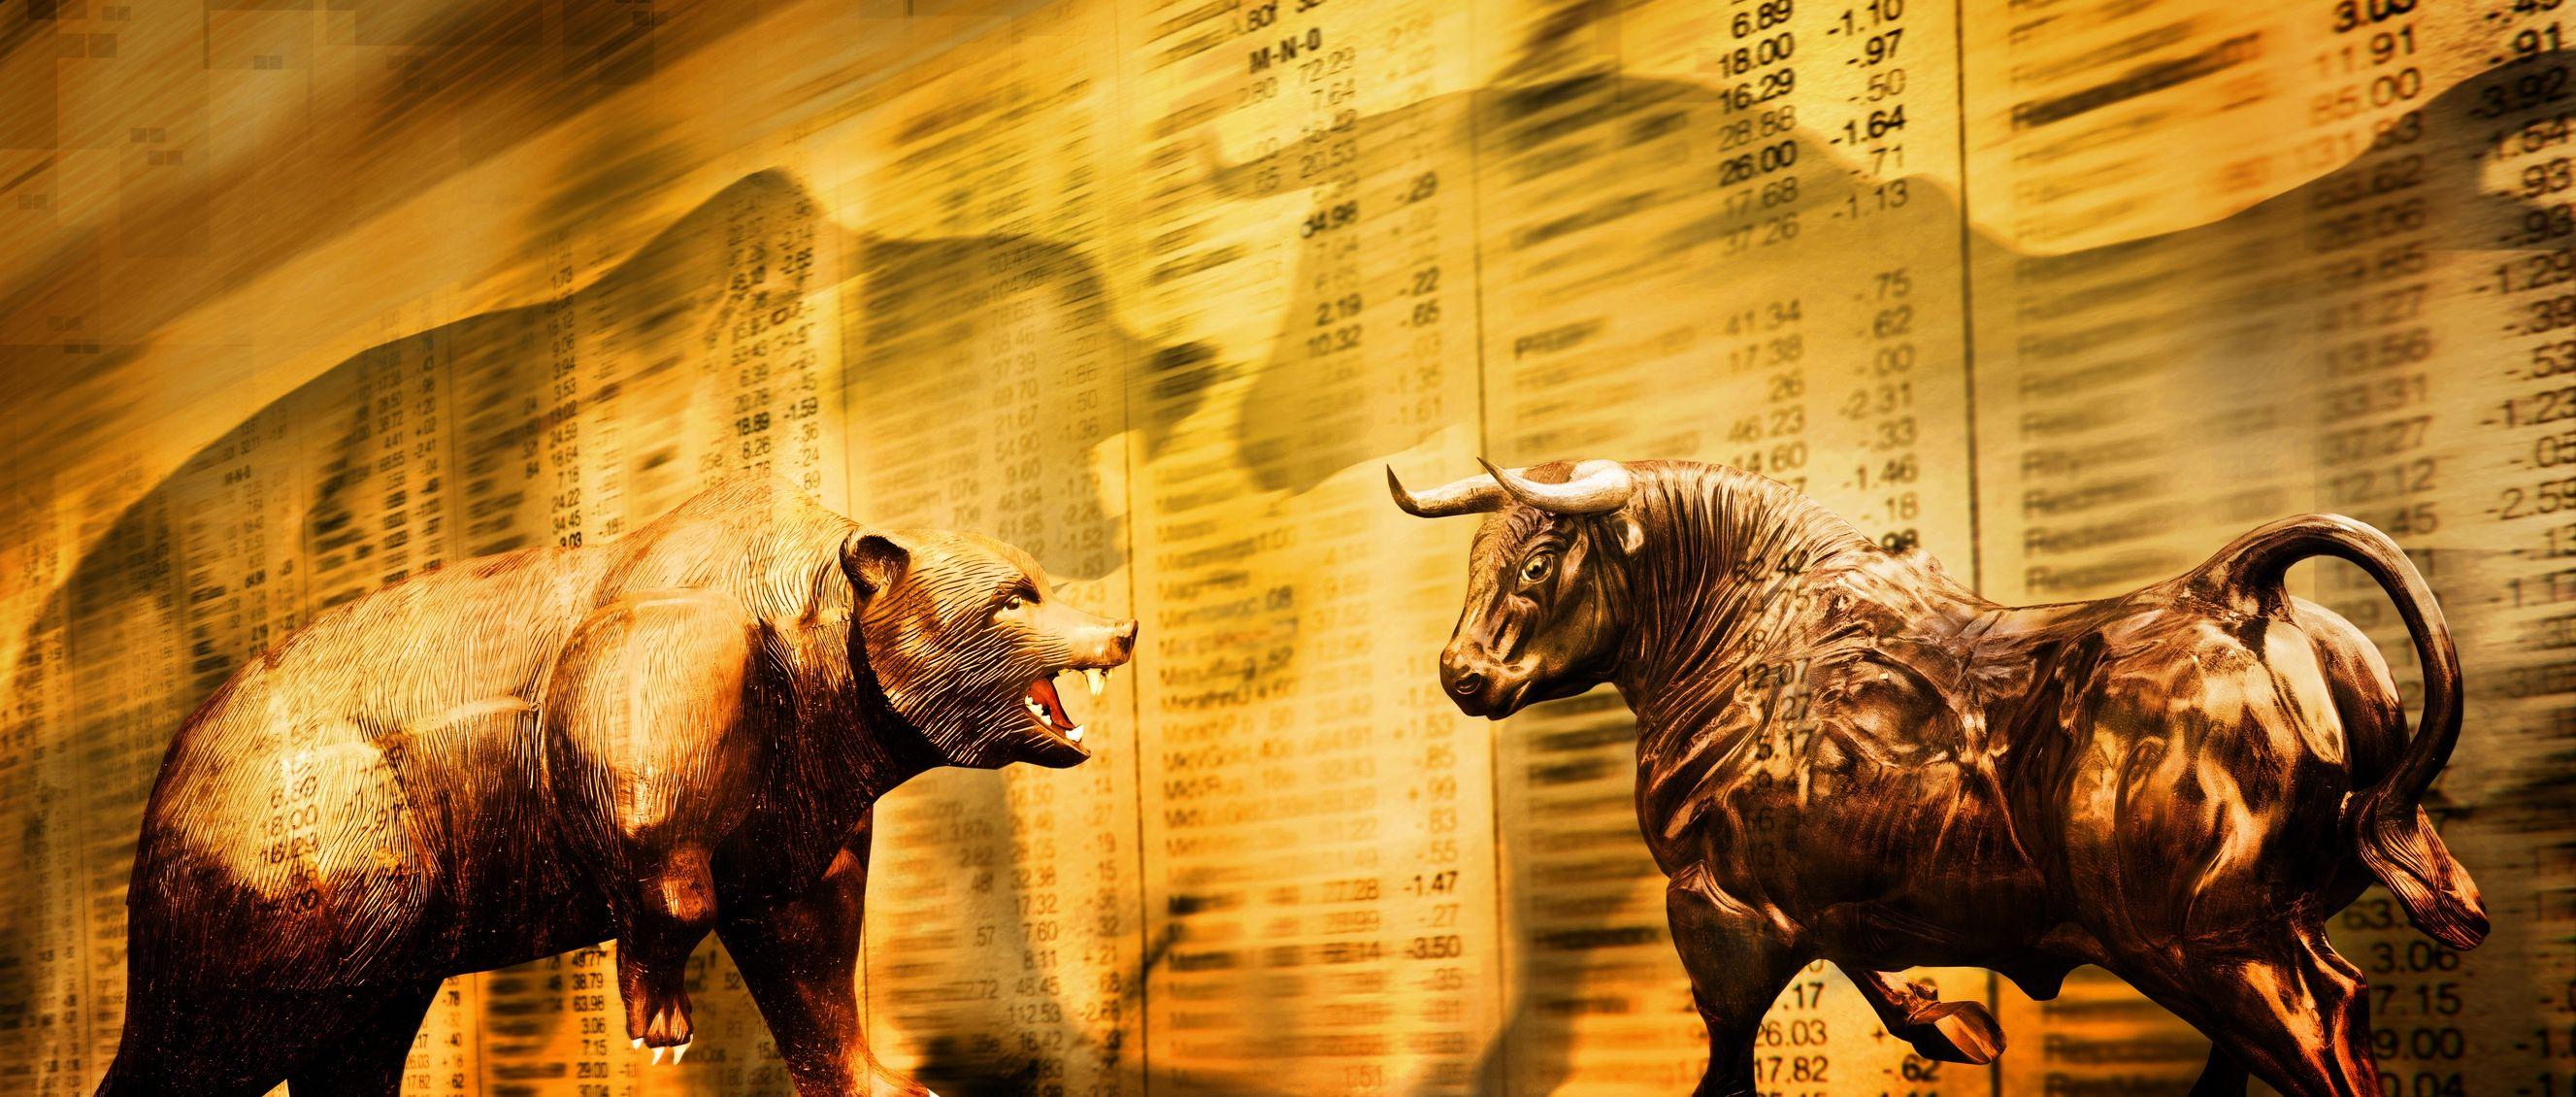 Stock Exchange Trading Concept the Bulls and Bears Struggle Equity Market  Illustration Stock Image  Image of hacker financial 251732769